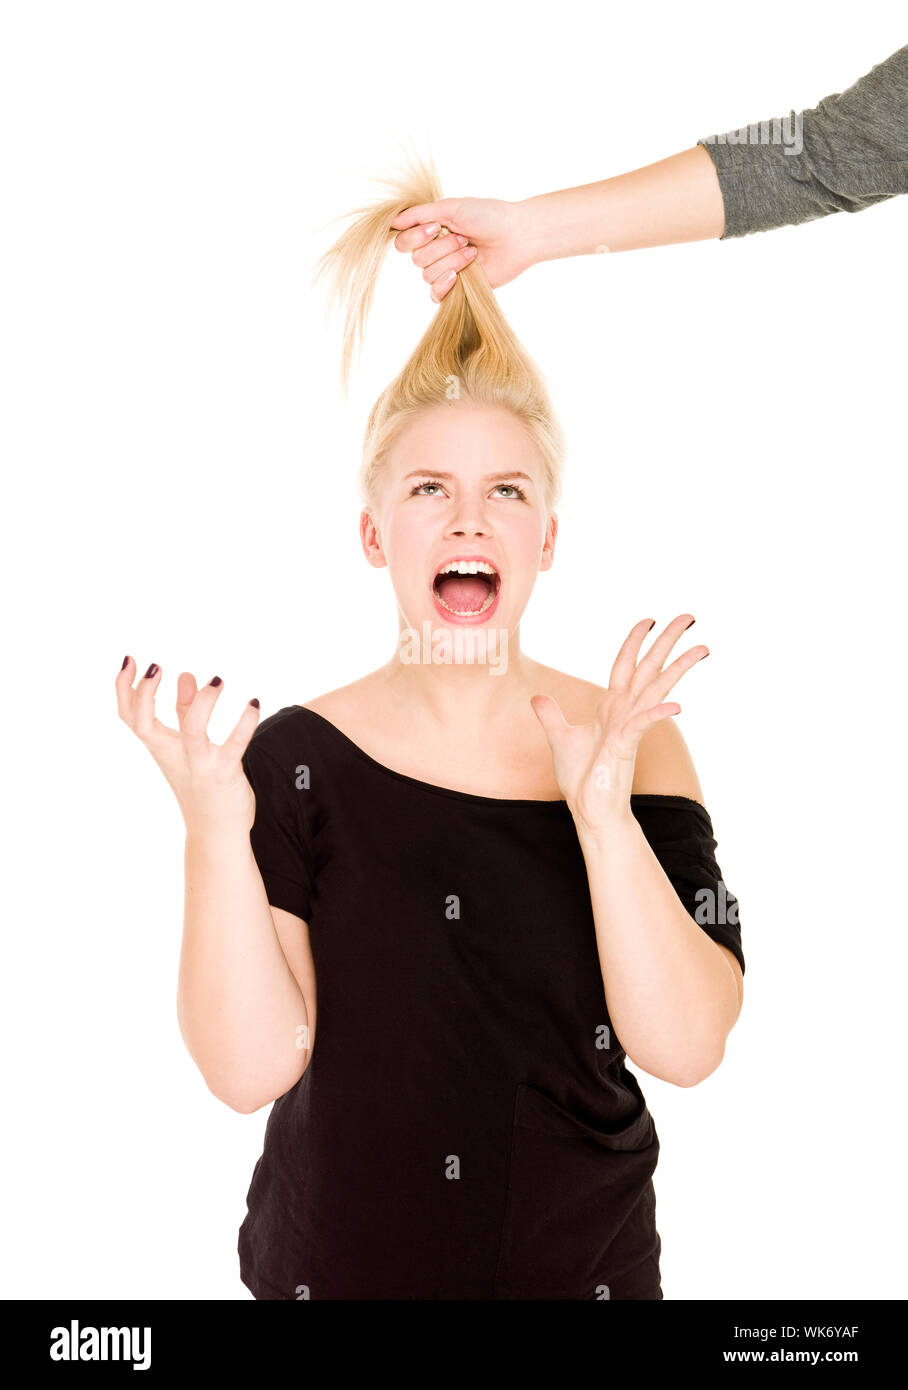 Blond woman in pain because someone pulling her hair Stock Photo